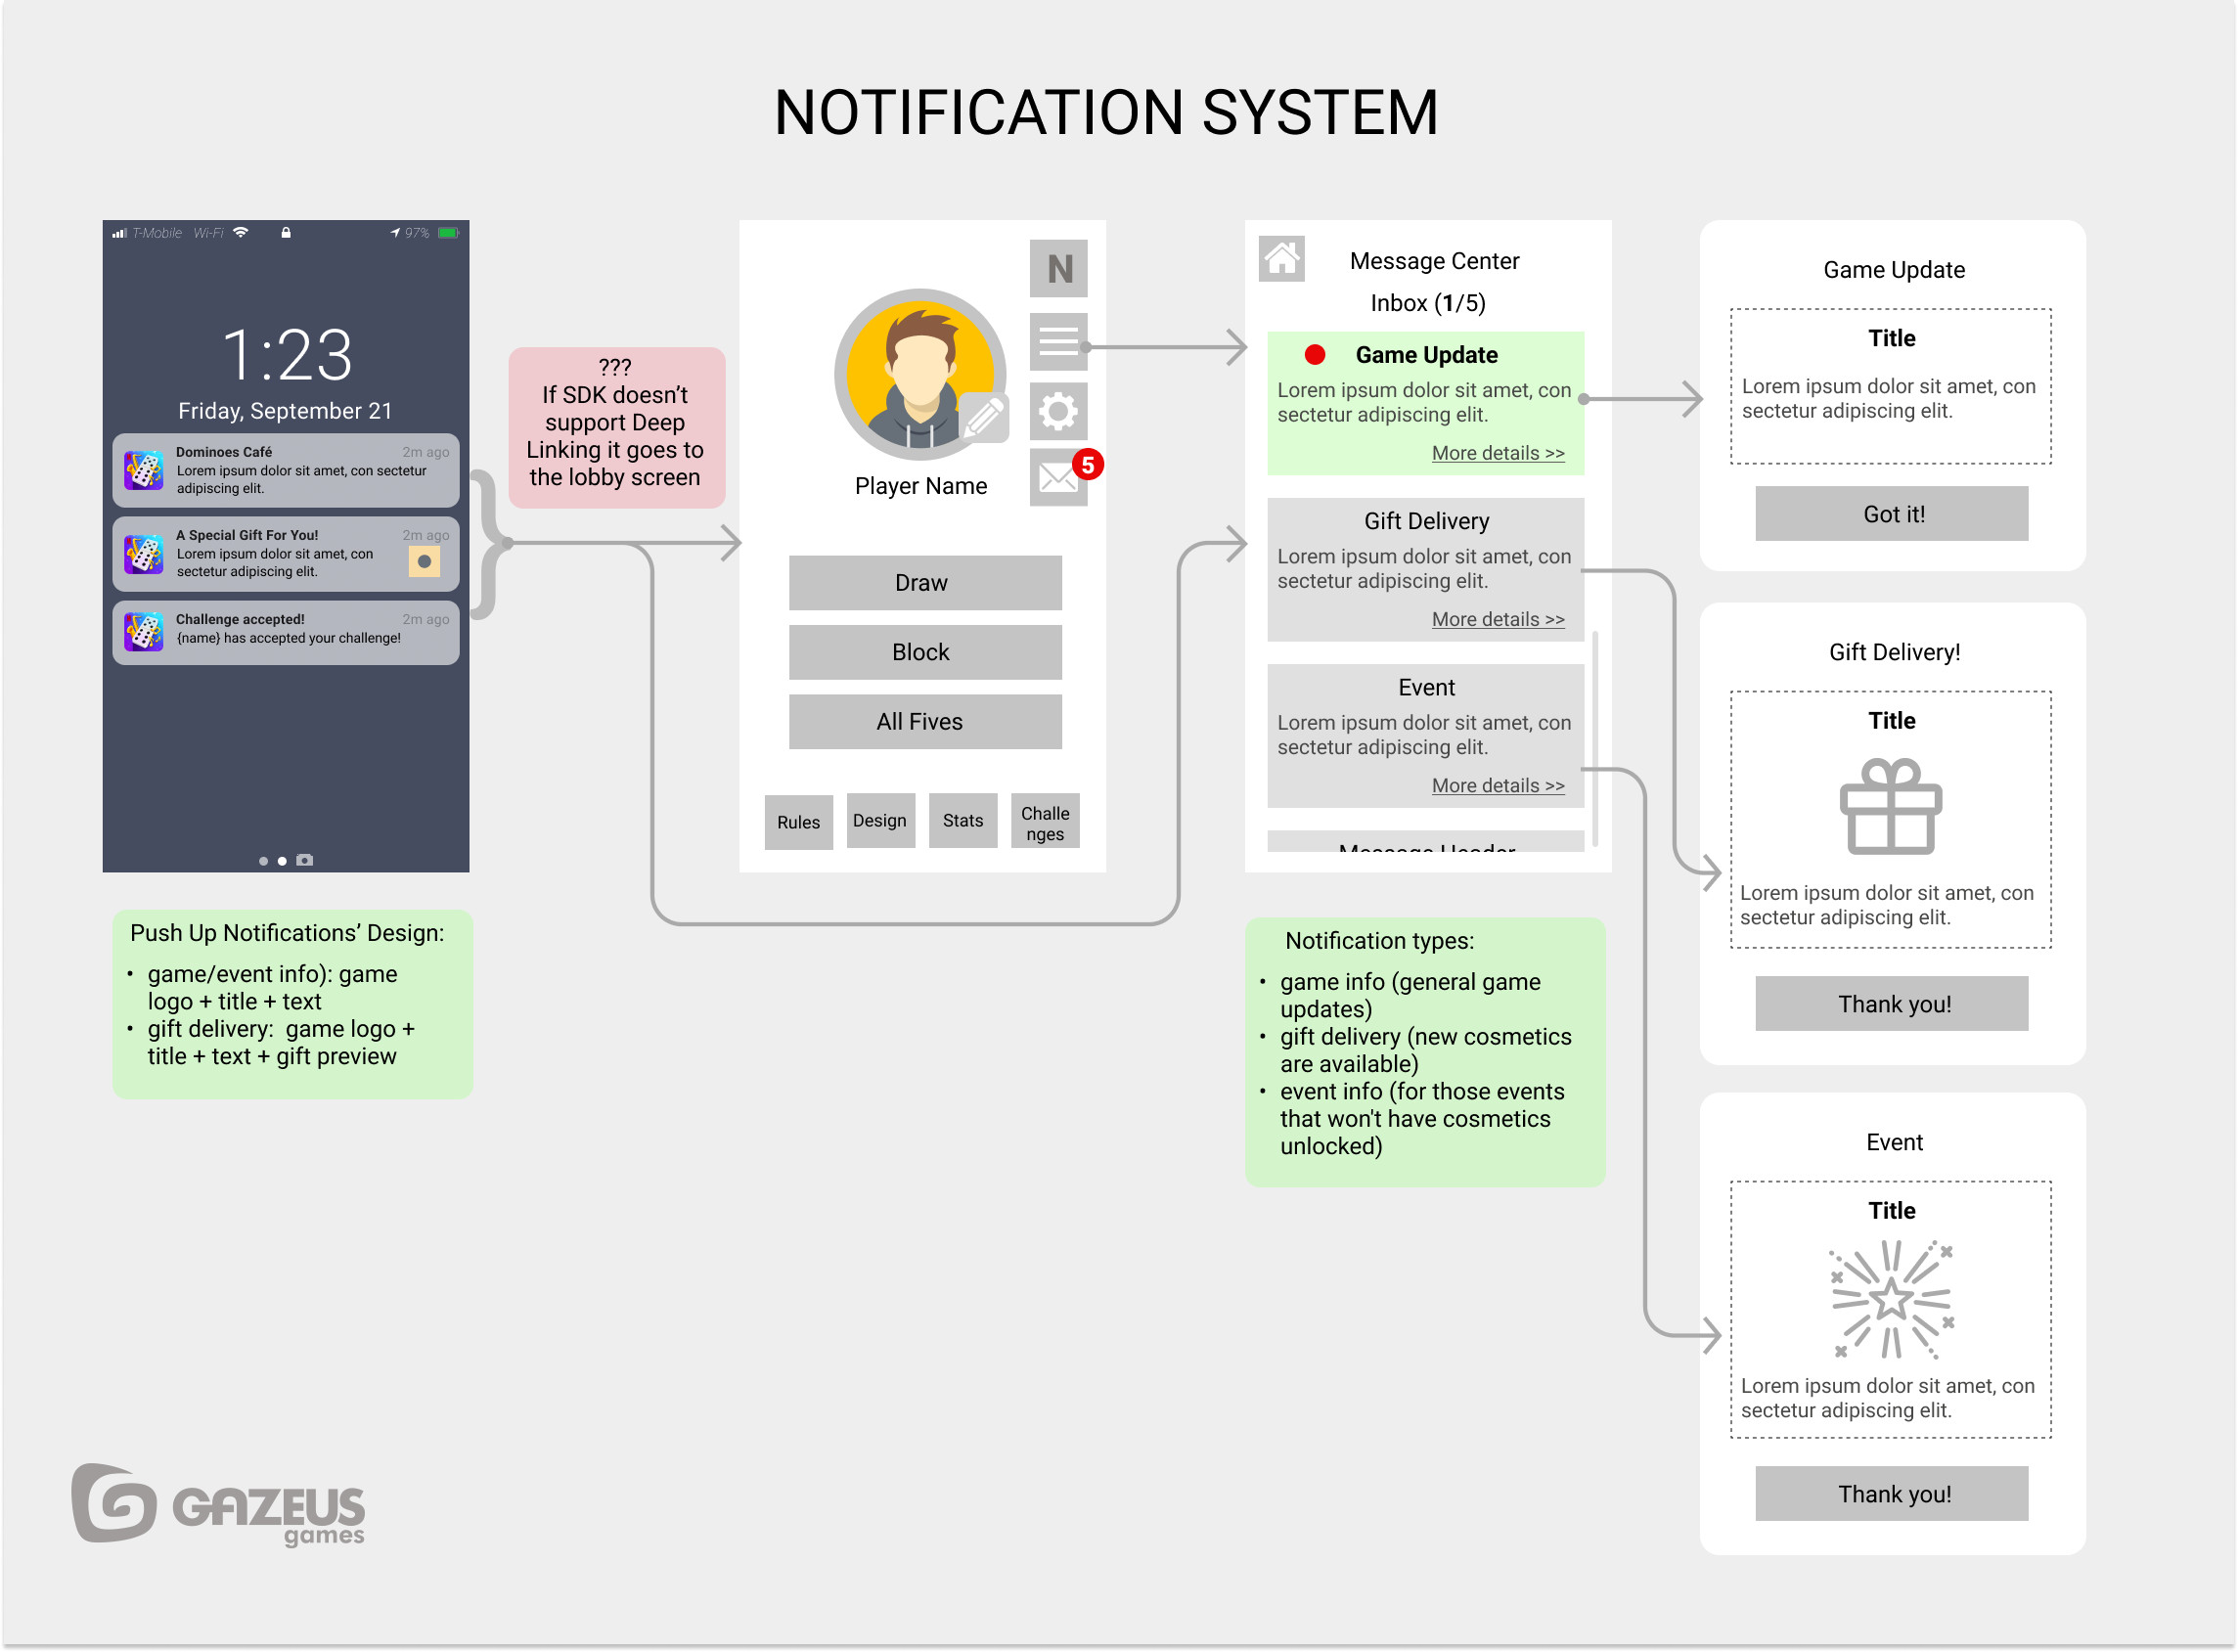 Notification system UX flow for Dominoes Café (mobile game)